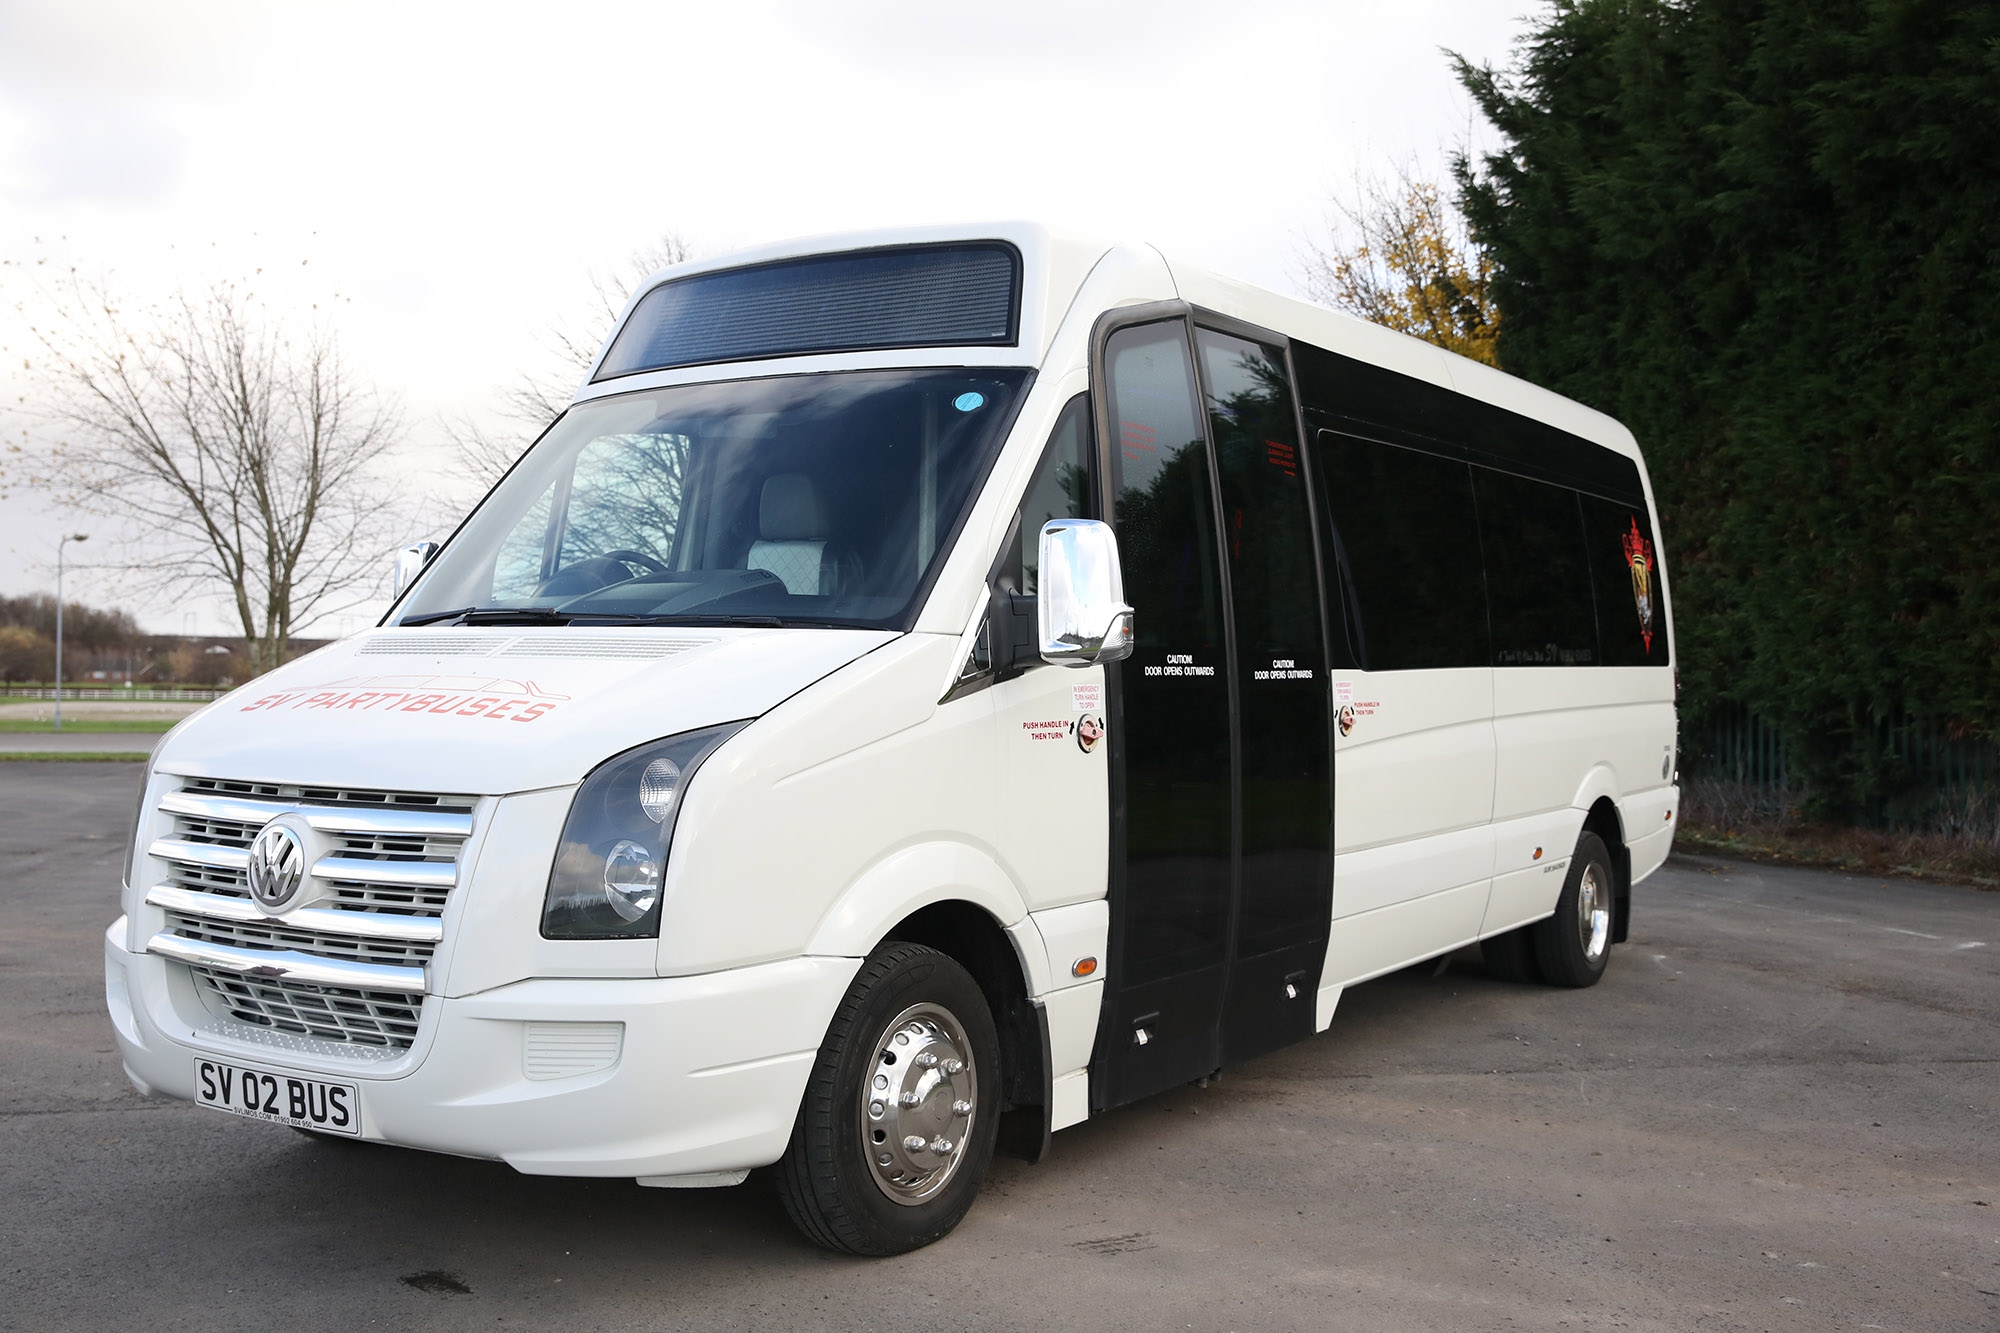 What to Look for in a South Wales Party Bus Hire Service